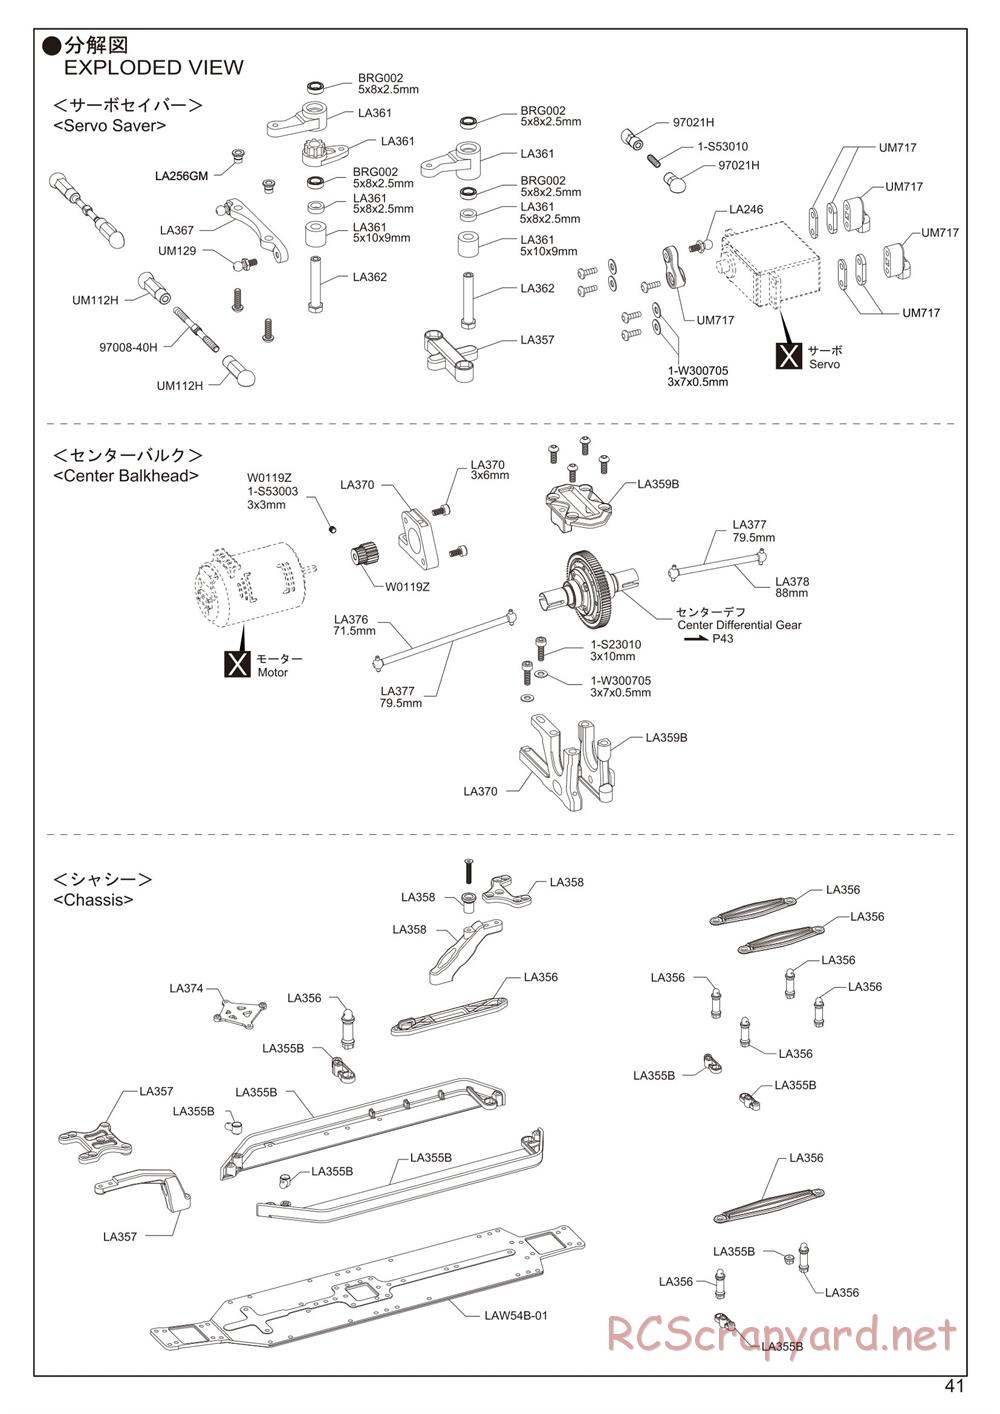 Kyosho - Lazer ZX6.6 - Exploded Views - Page 2